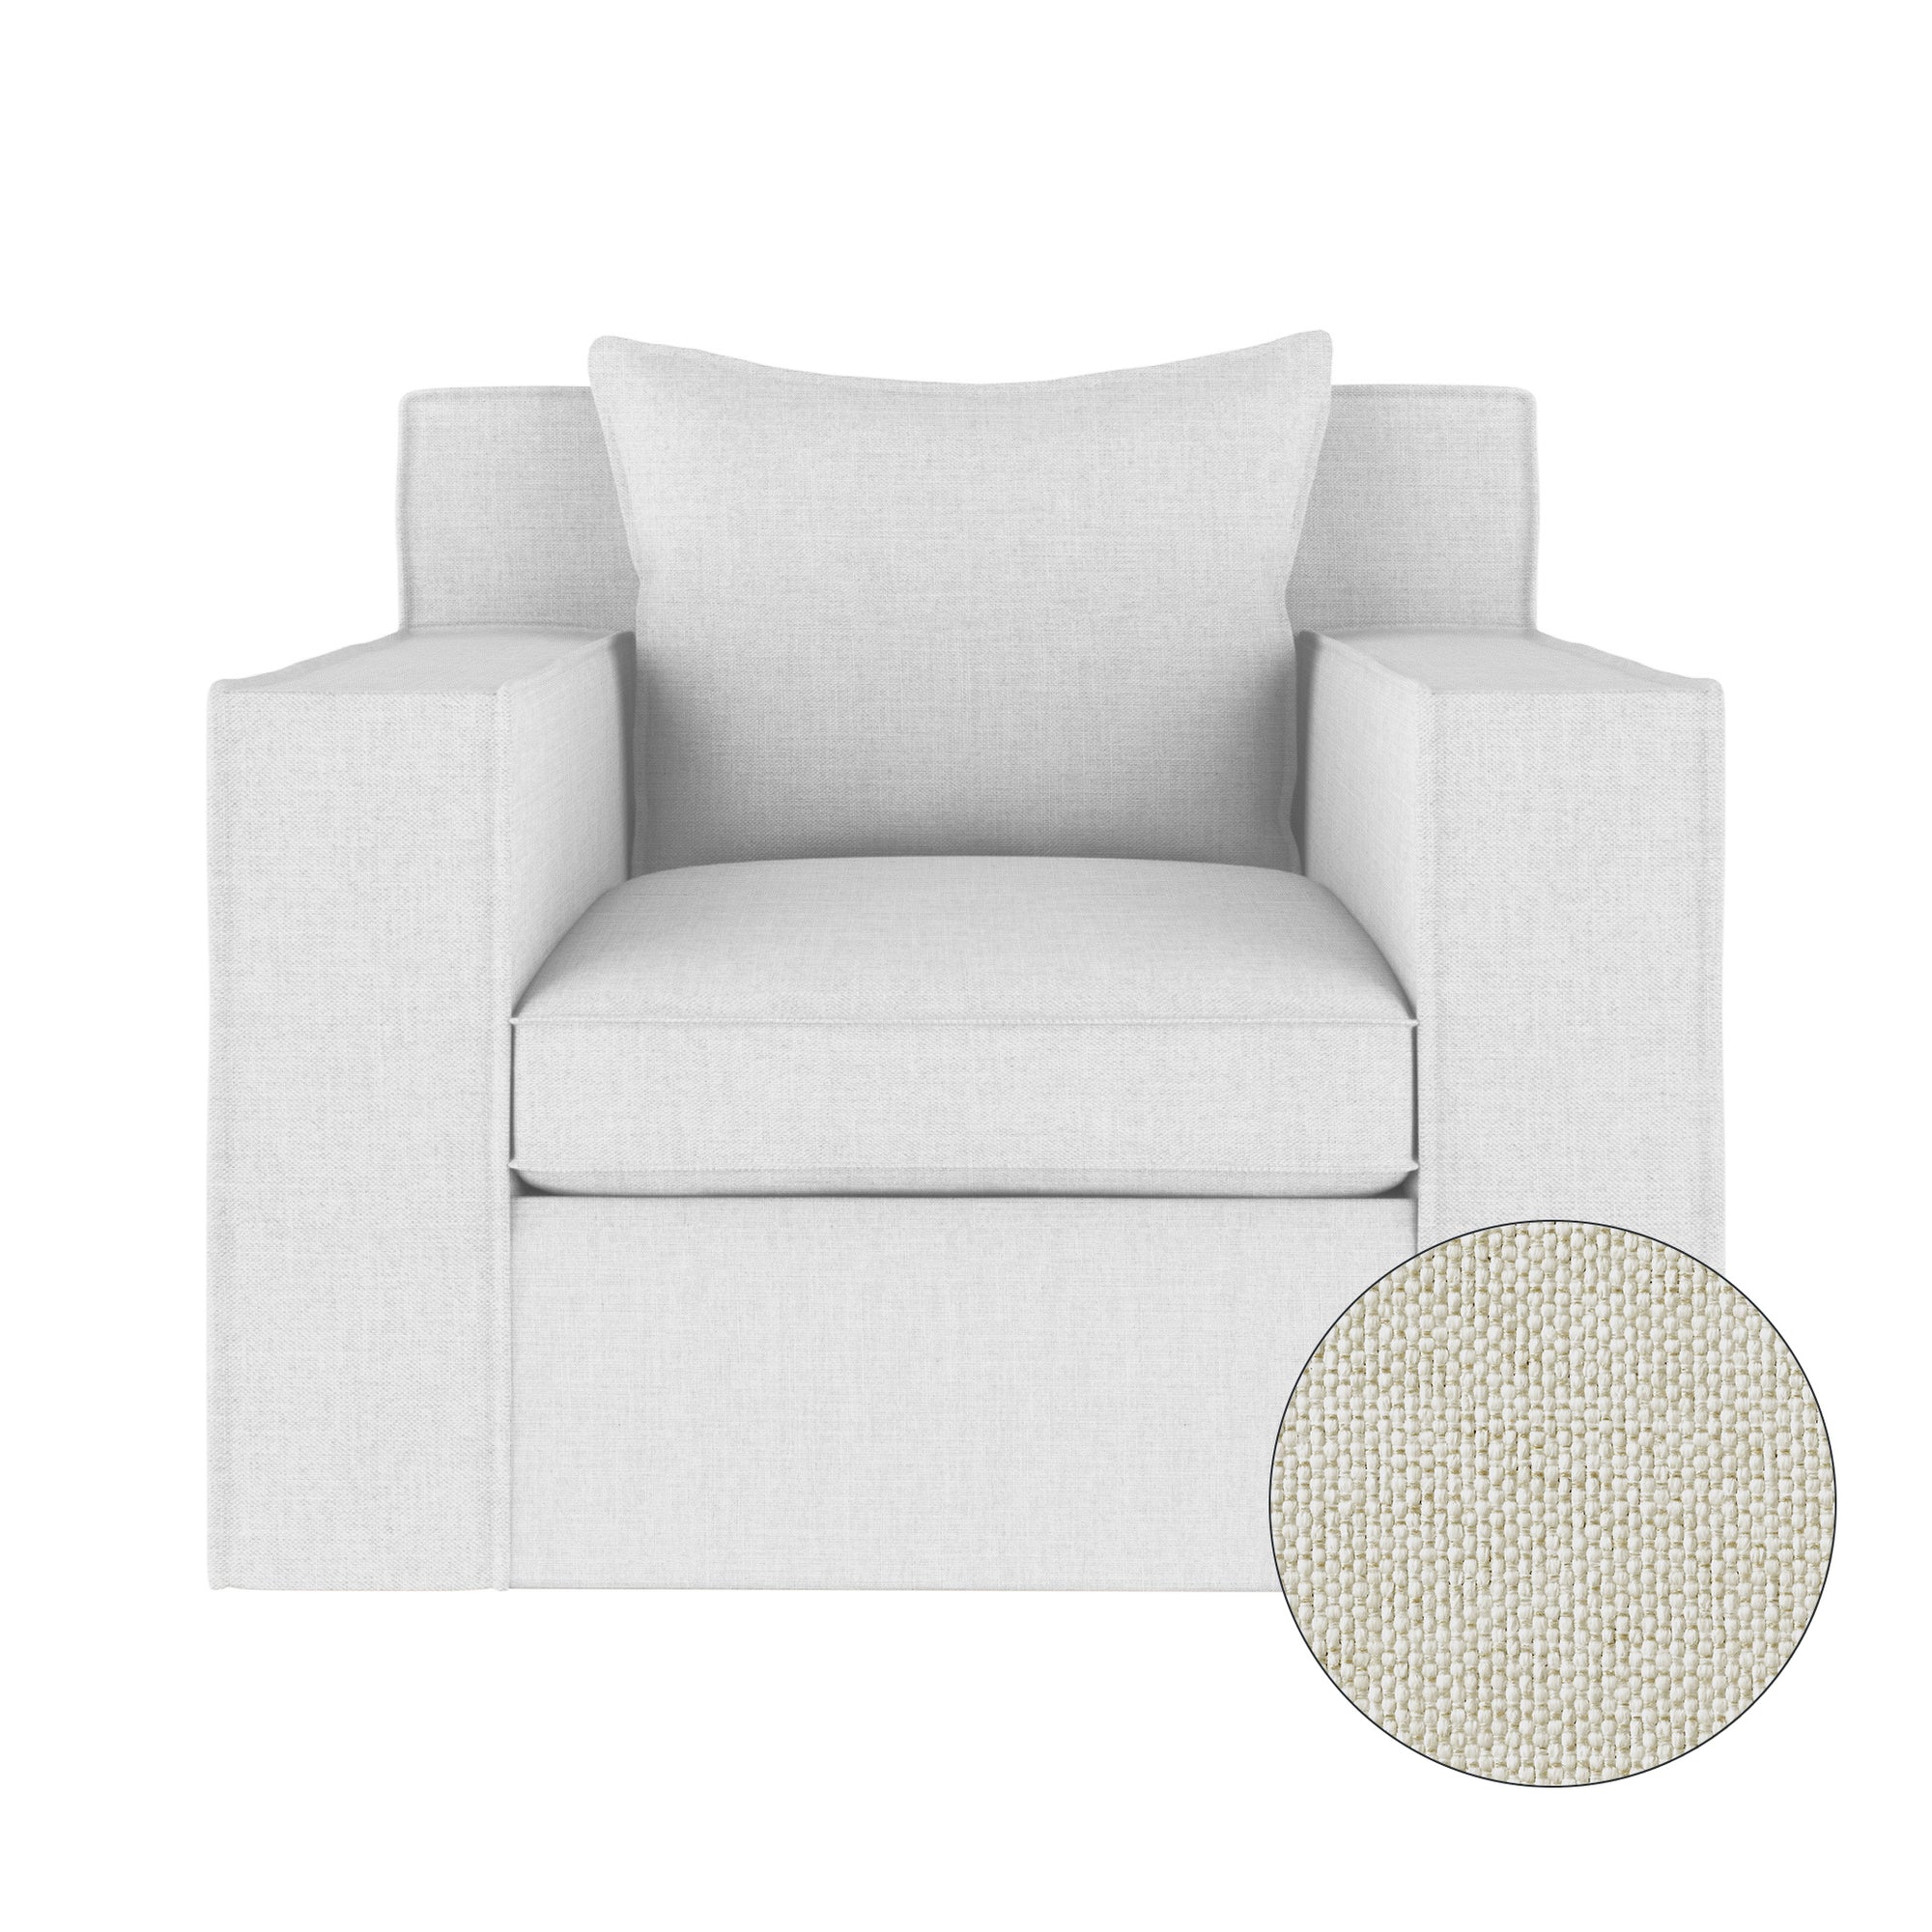 Mulberry Chair - Alabaster Pebble Weave Linen